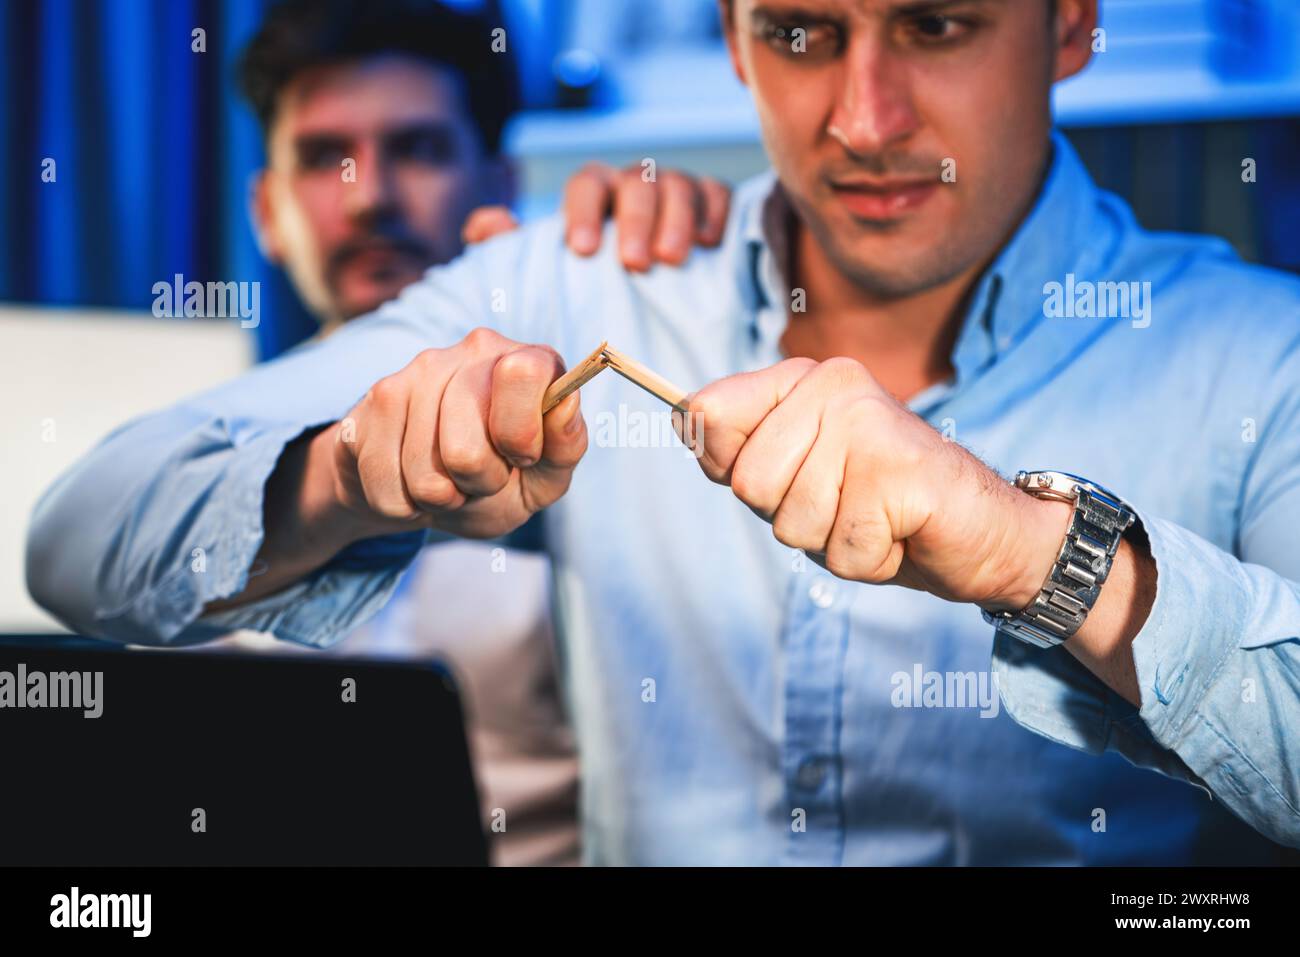 Stressful burnout of businessman destroying pencil for venting emotion in overwork load at night time, supported by business partner to solve issue Stock Photo